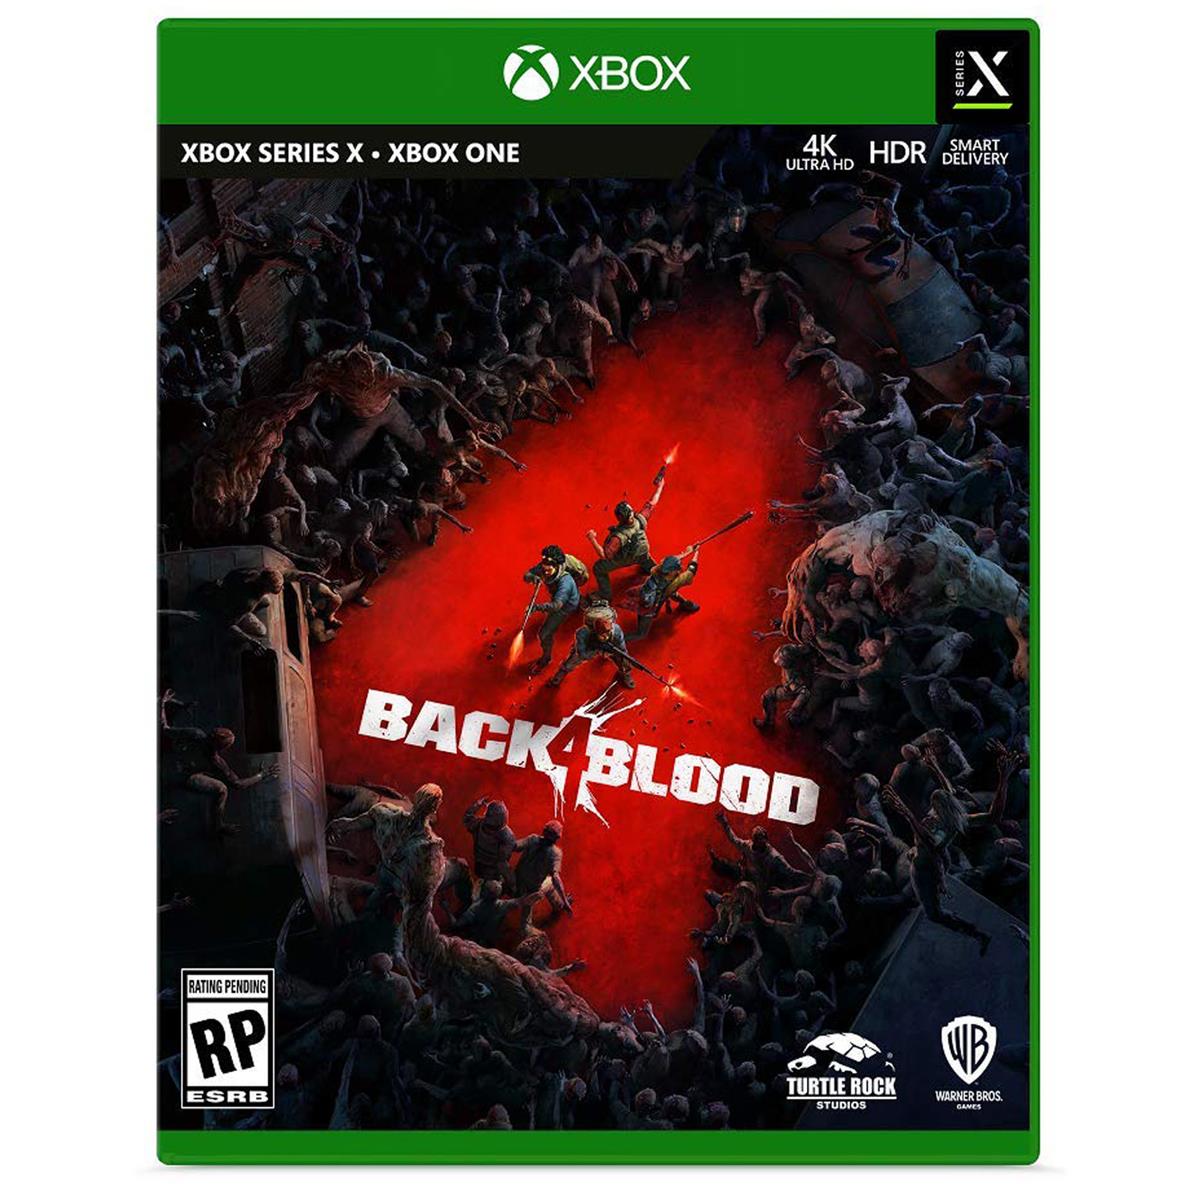 Image of Warner Bros Games Warner Back 4 Blood Standard Edition for Xbox One and Xbox Series X|S